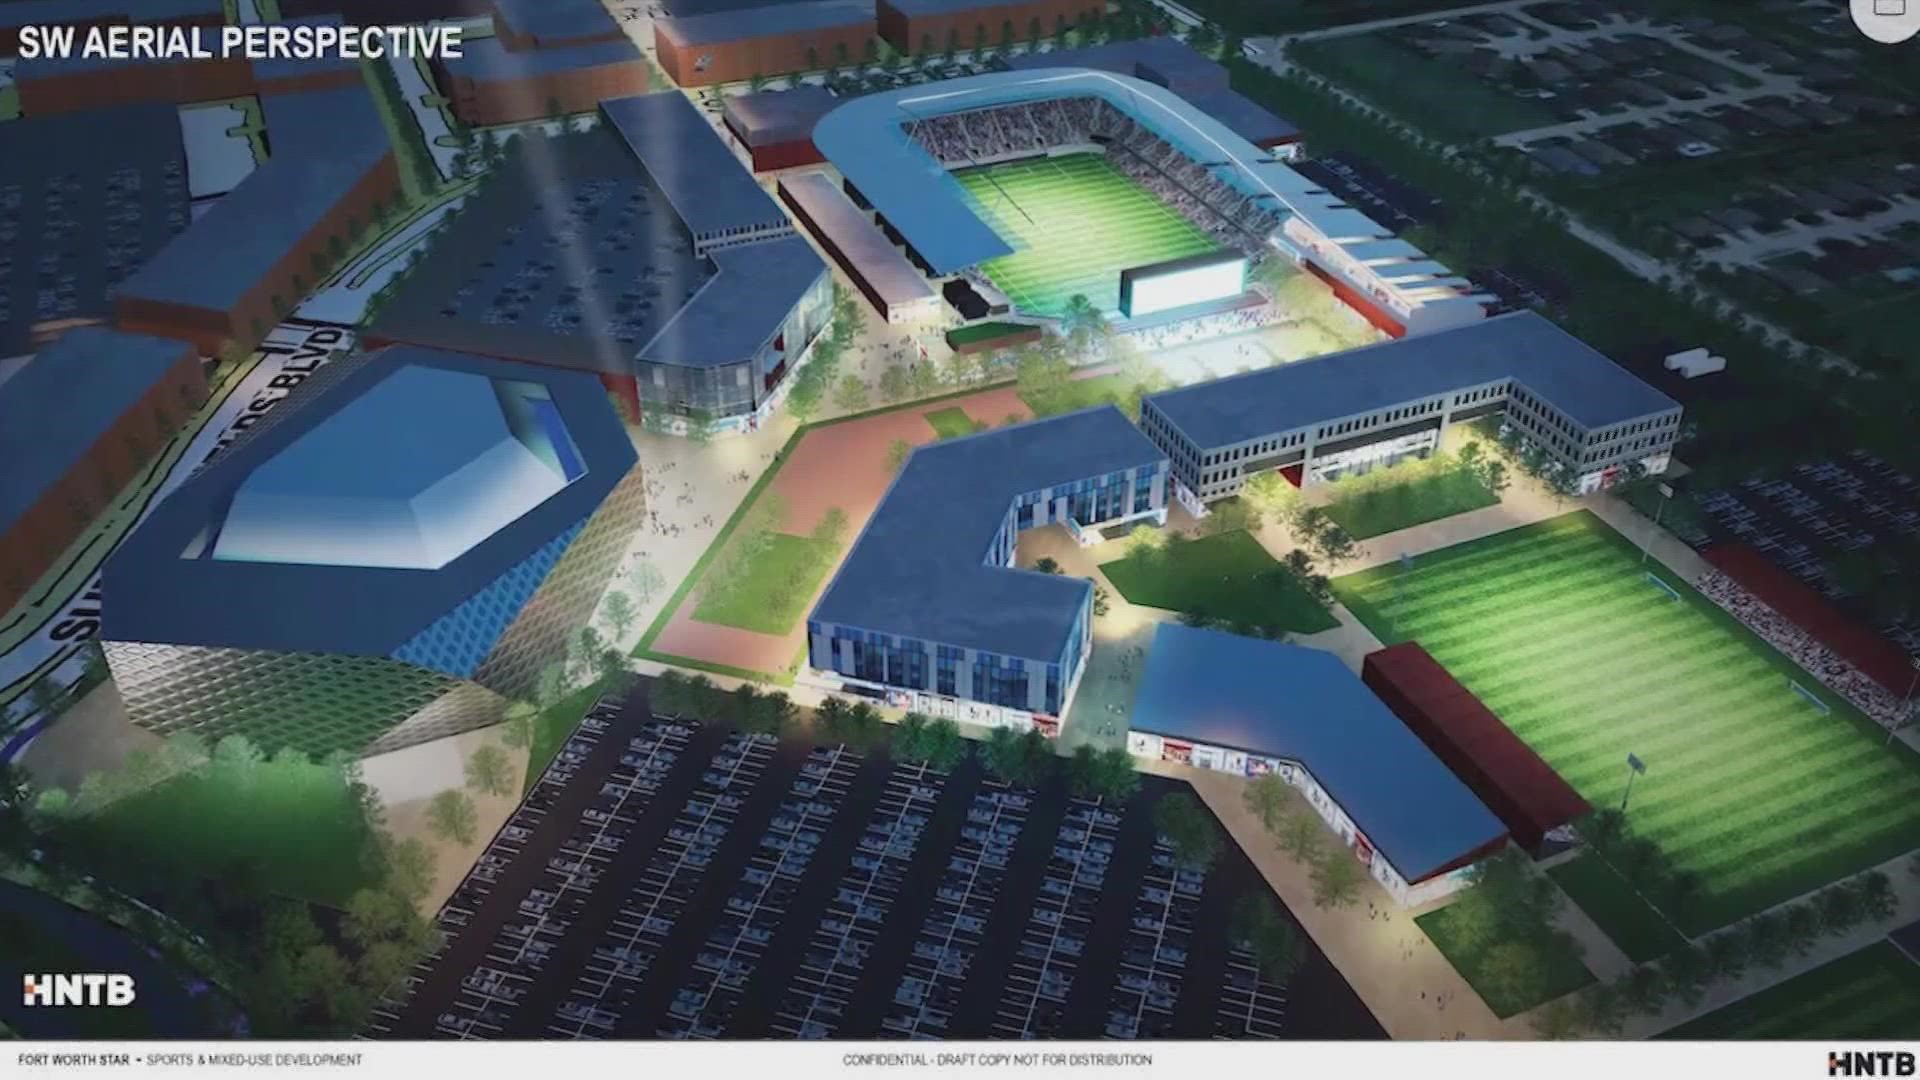 Building a minor league soccer stadium is an ambitious idea that District 4 councilmember Cary Moon is pushing for.